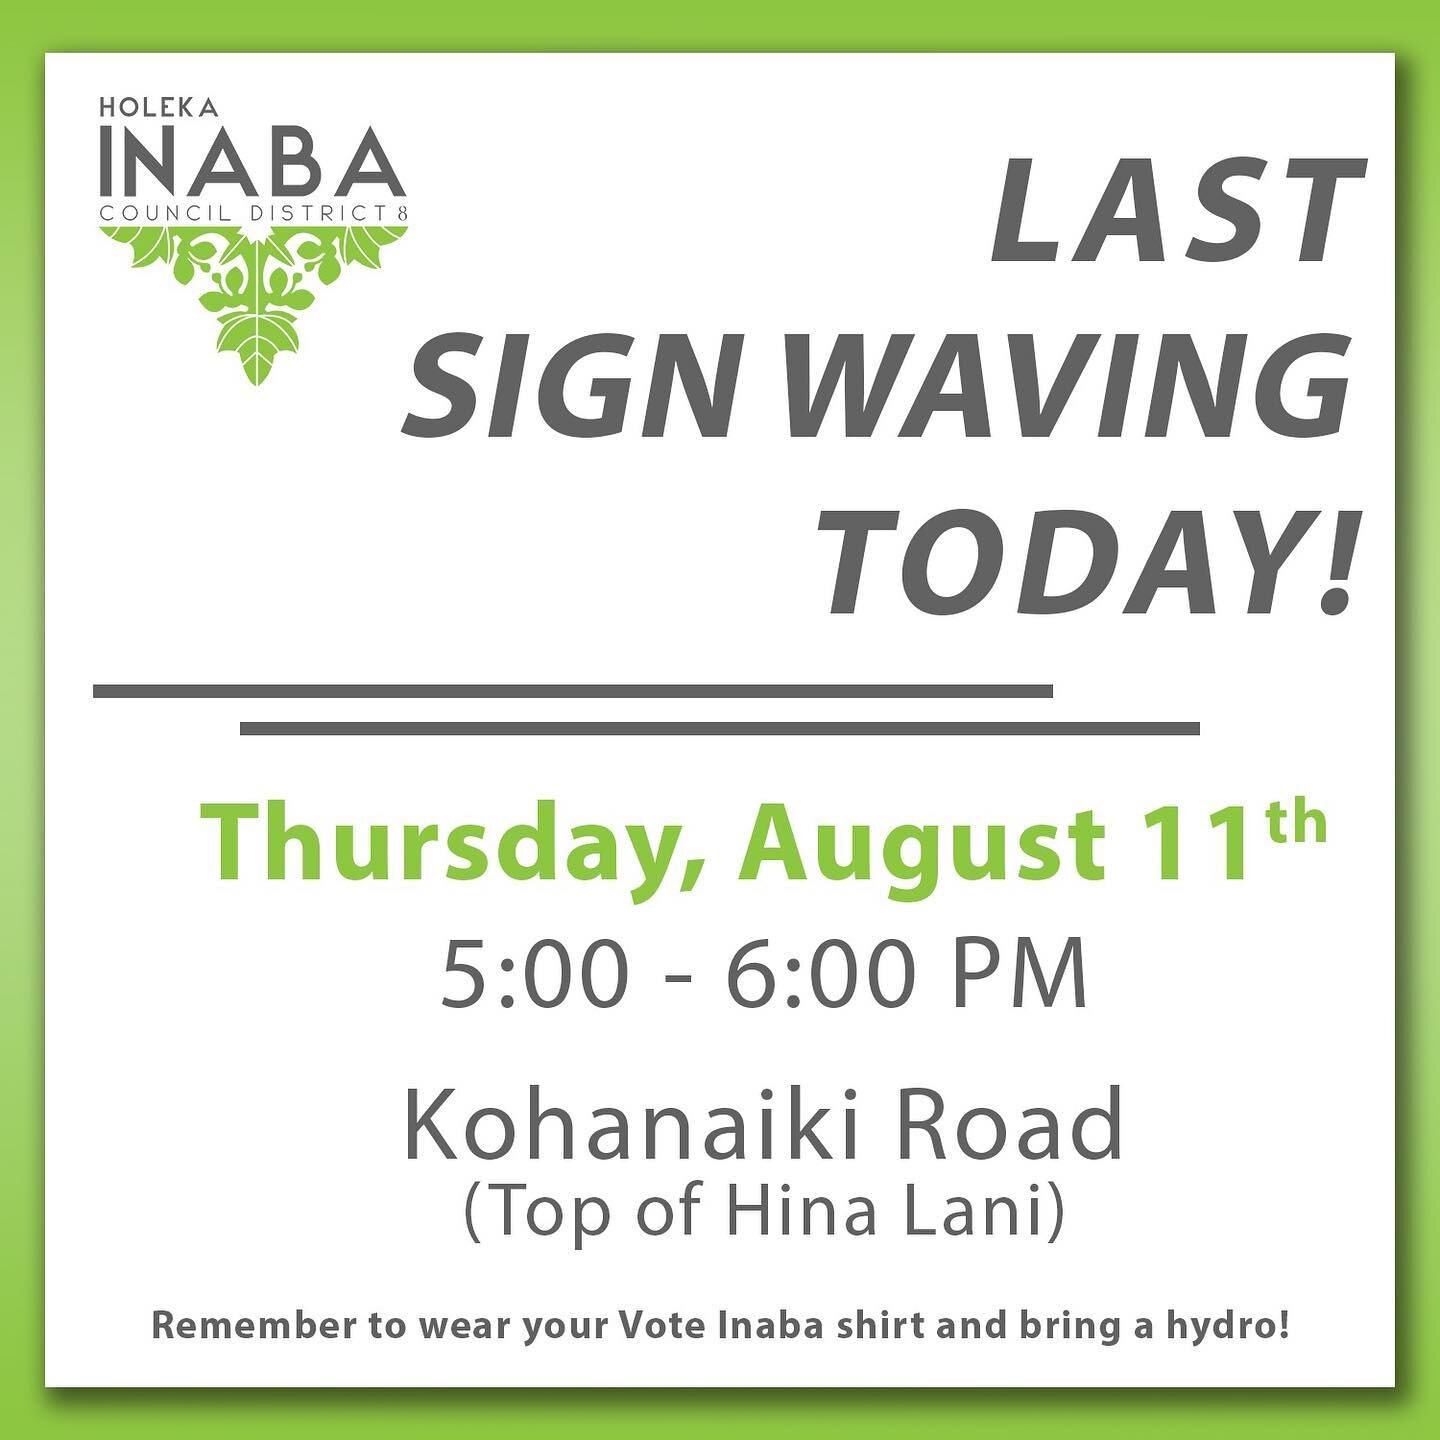 It&rsquo;s our very last sign waving today! Please join us from 5-6 pm at the top of Hina Lani. #VoteInaba ✅